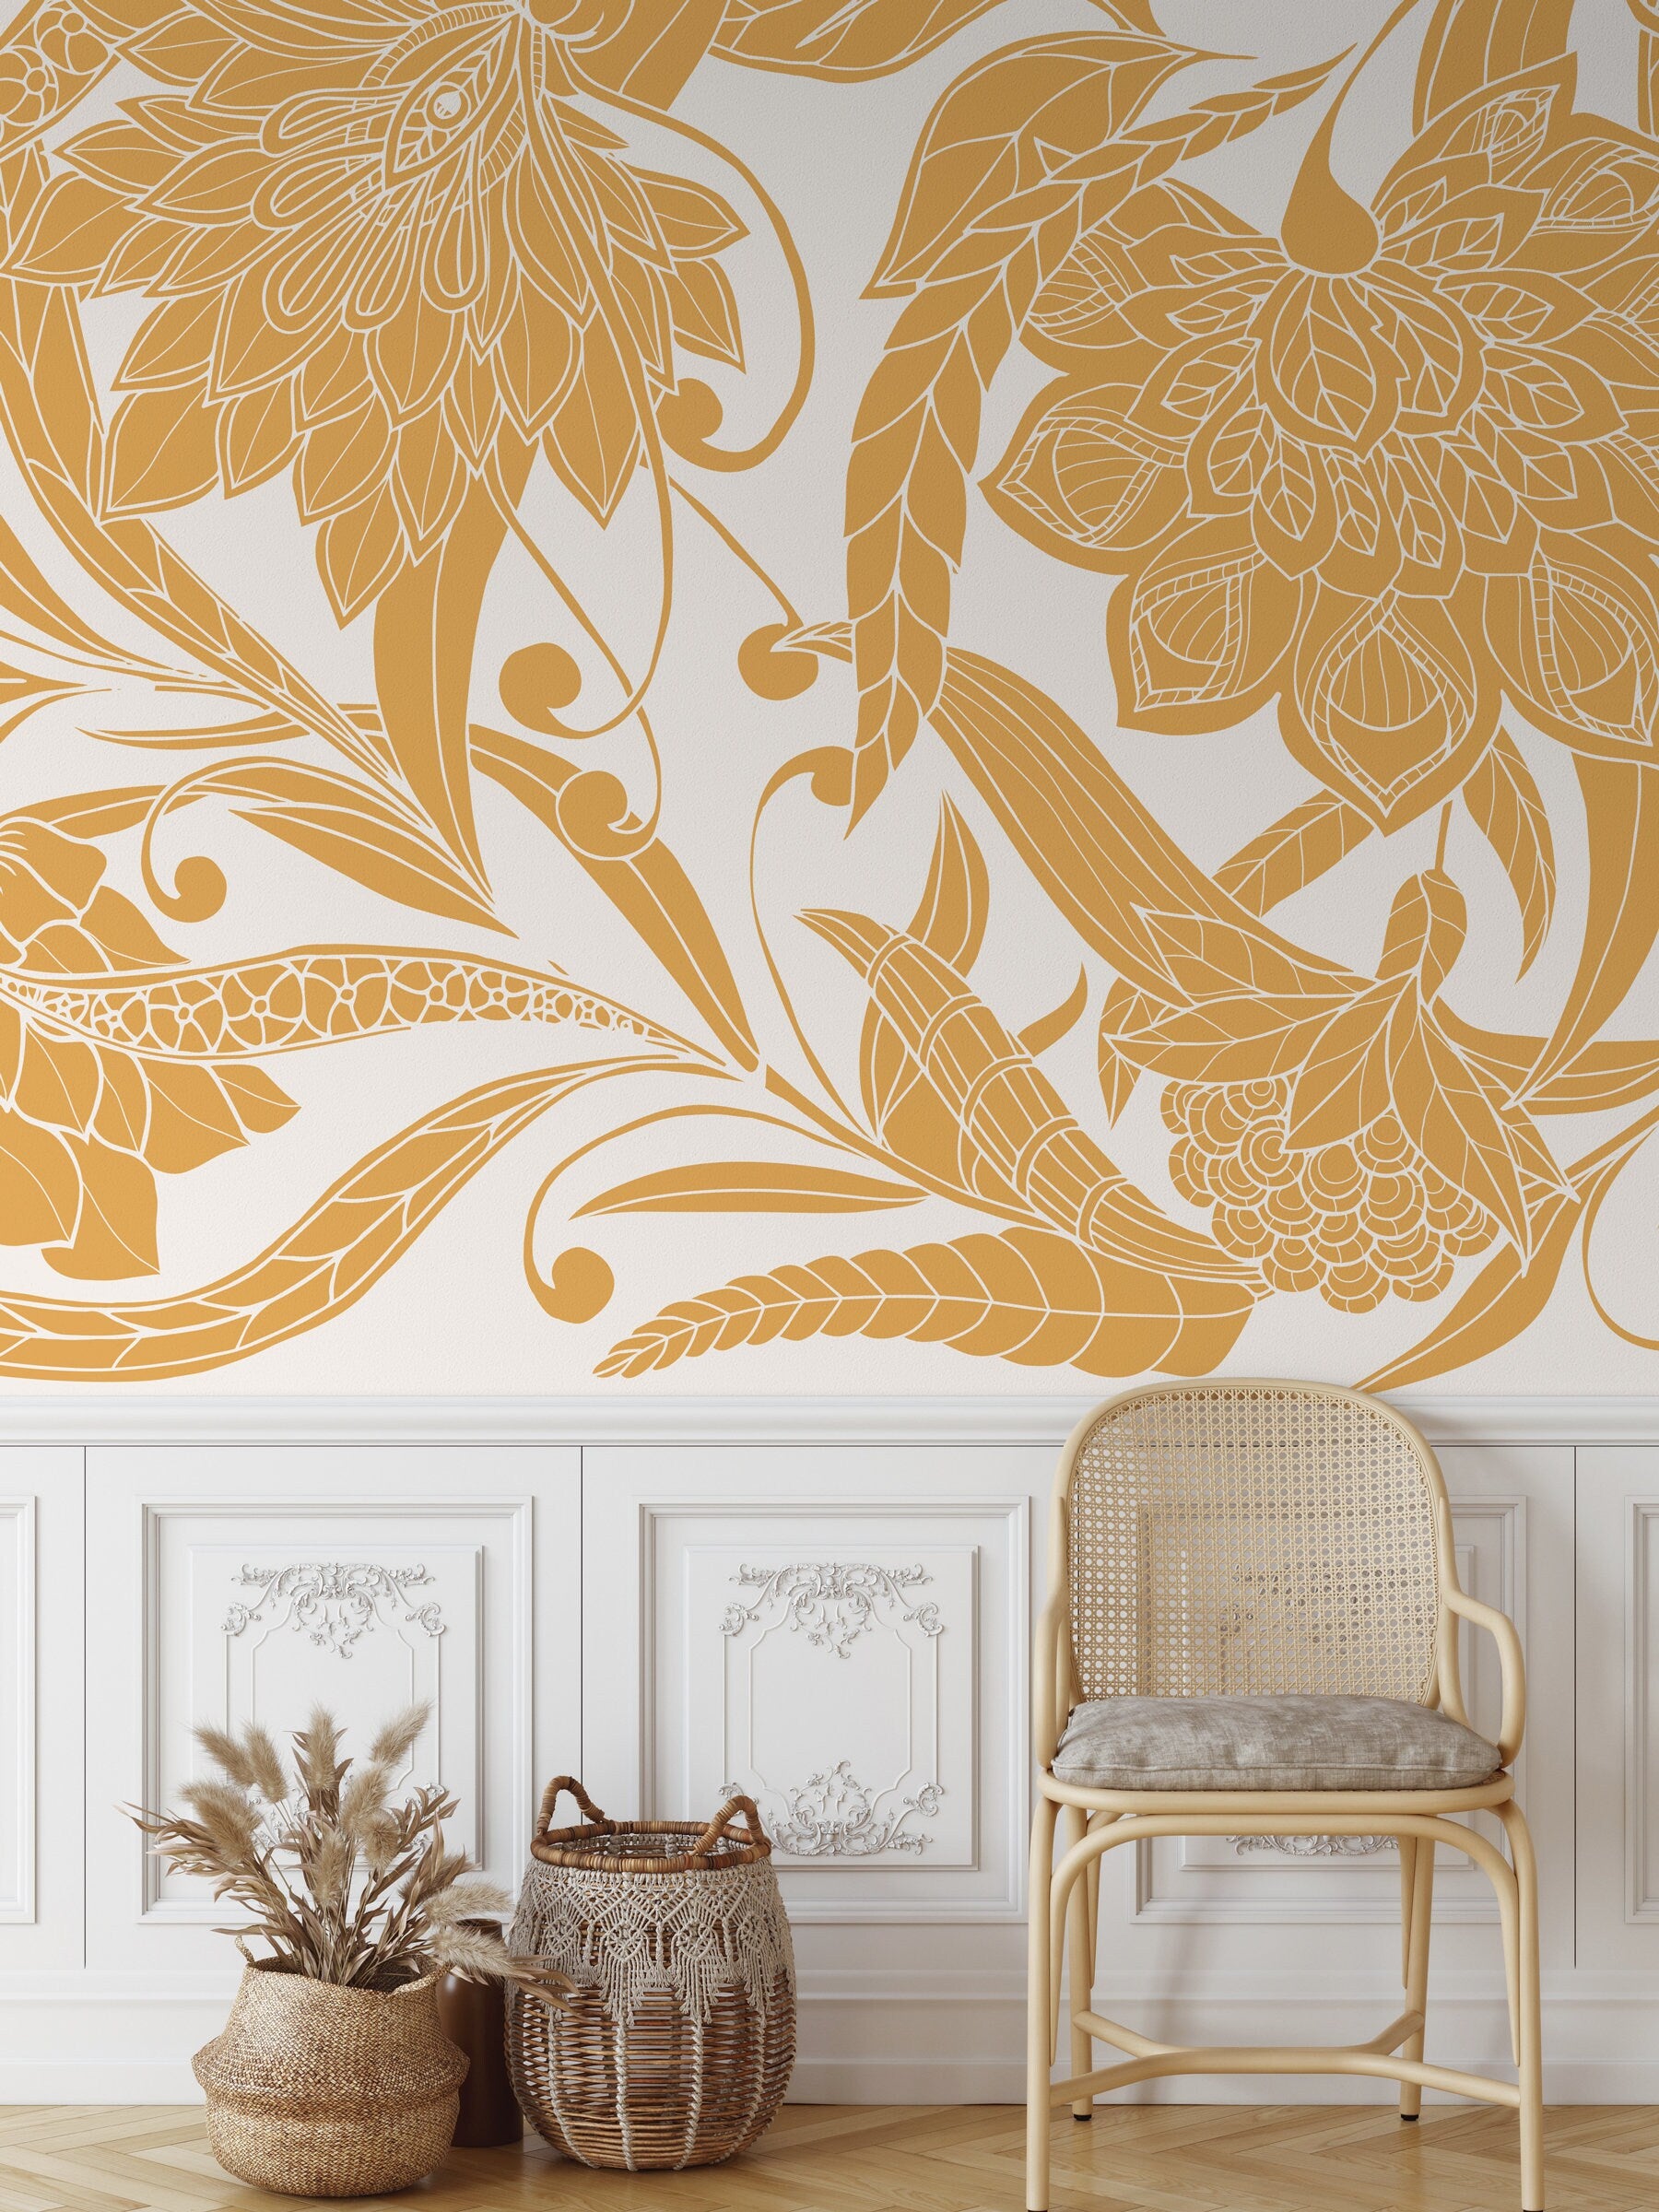 Wallpaper Peel and Stick Wallpaper Removable Wallpaper Home Decor Wall Art Wall Decor Room Decor / Floral Yellow Wallpaper - C438